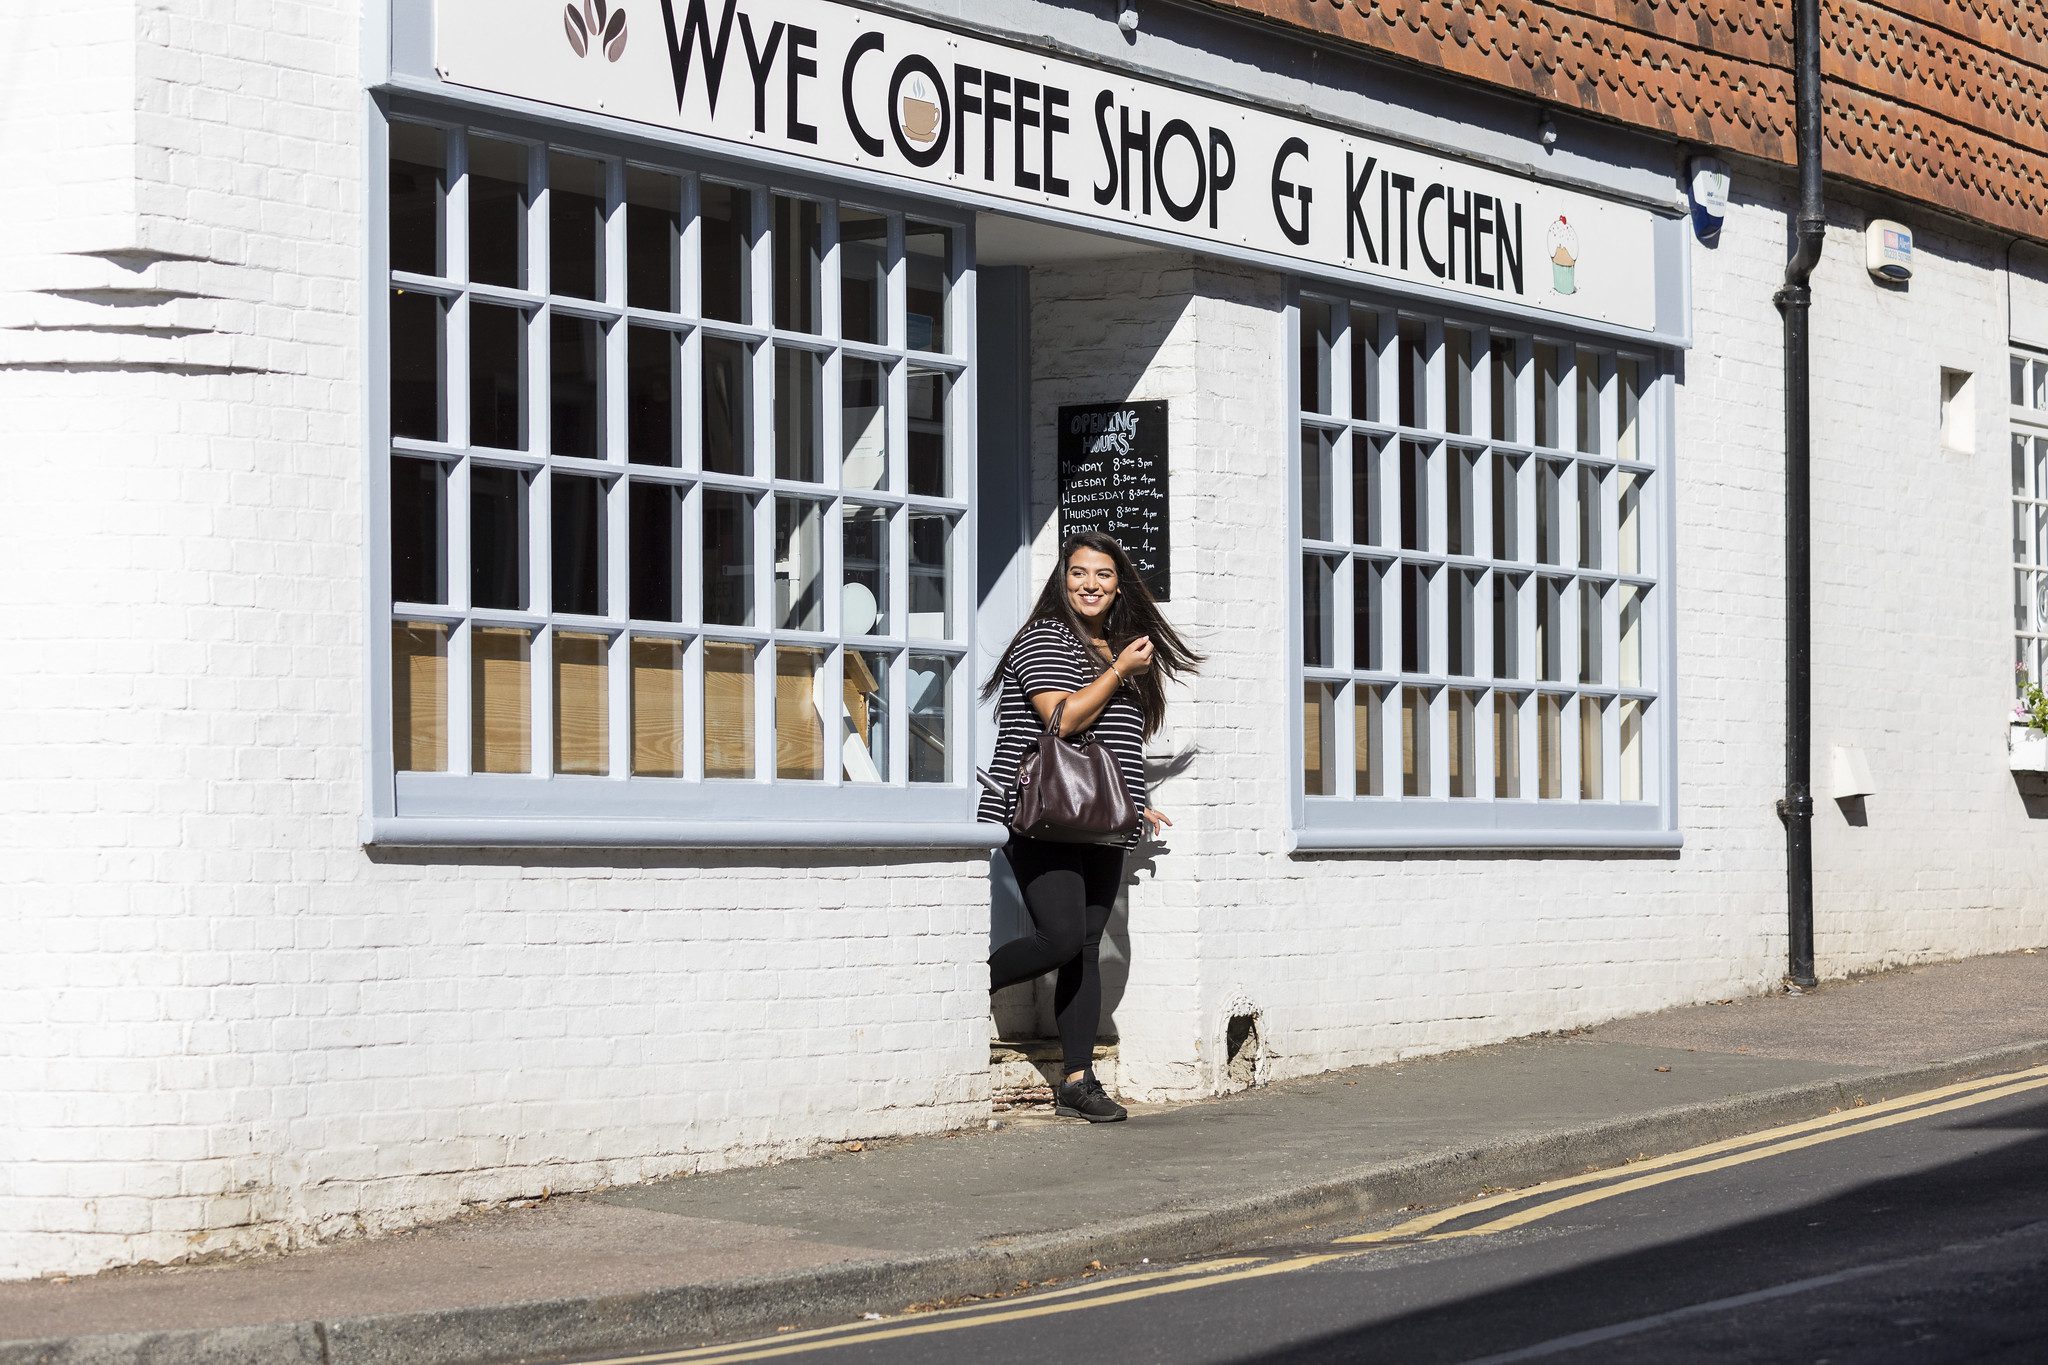 Smiling woman emerging from Wye coffee shop